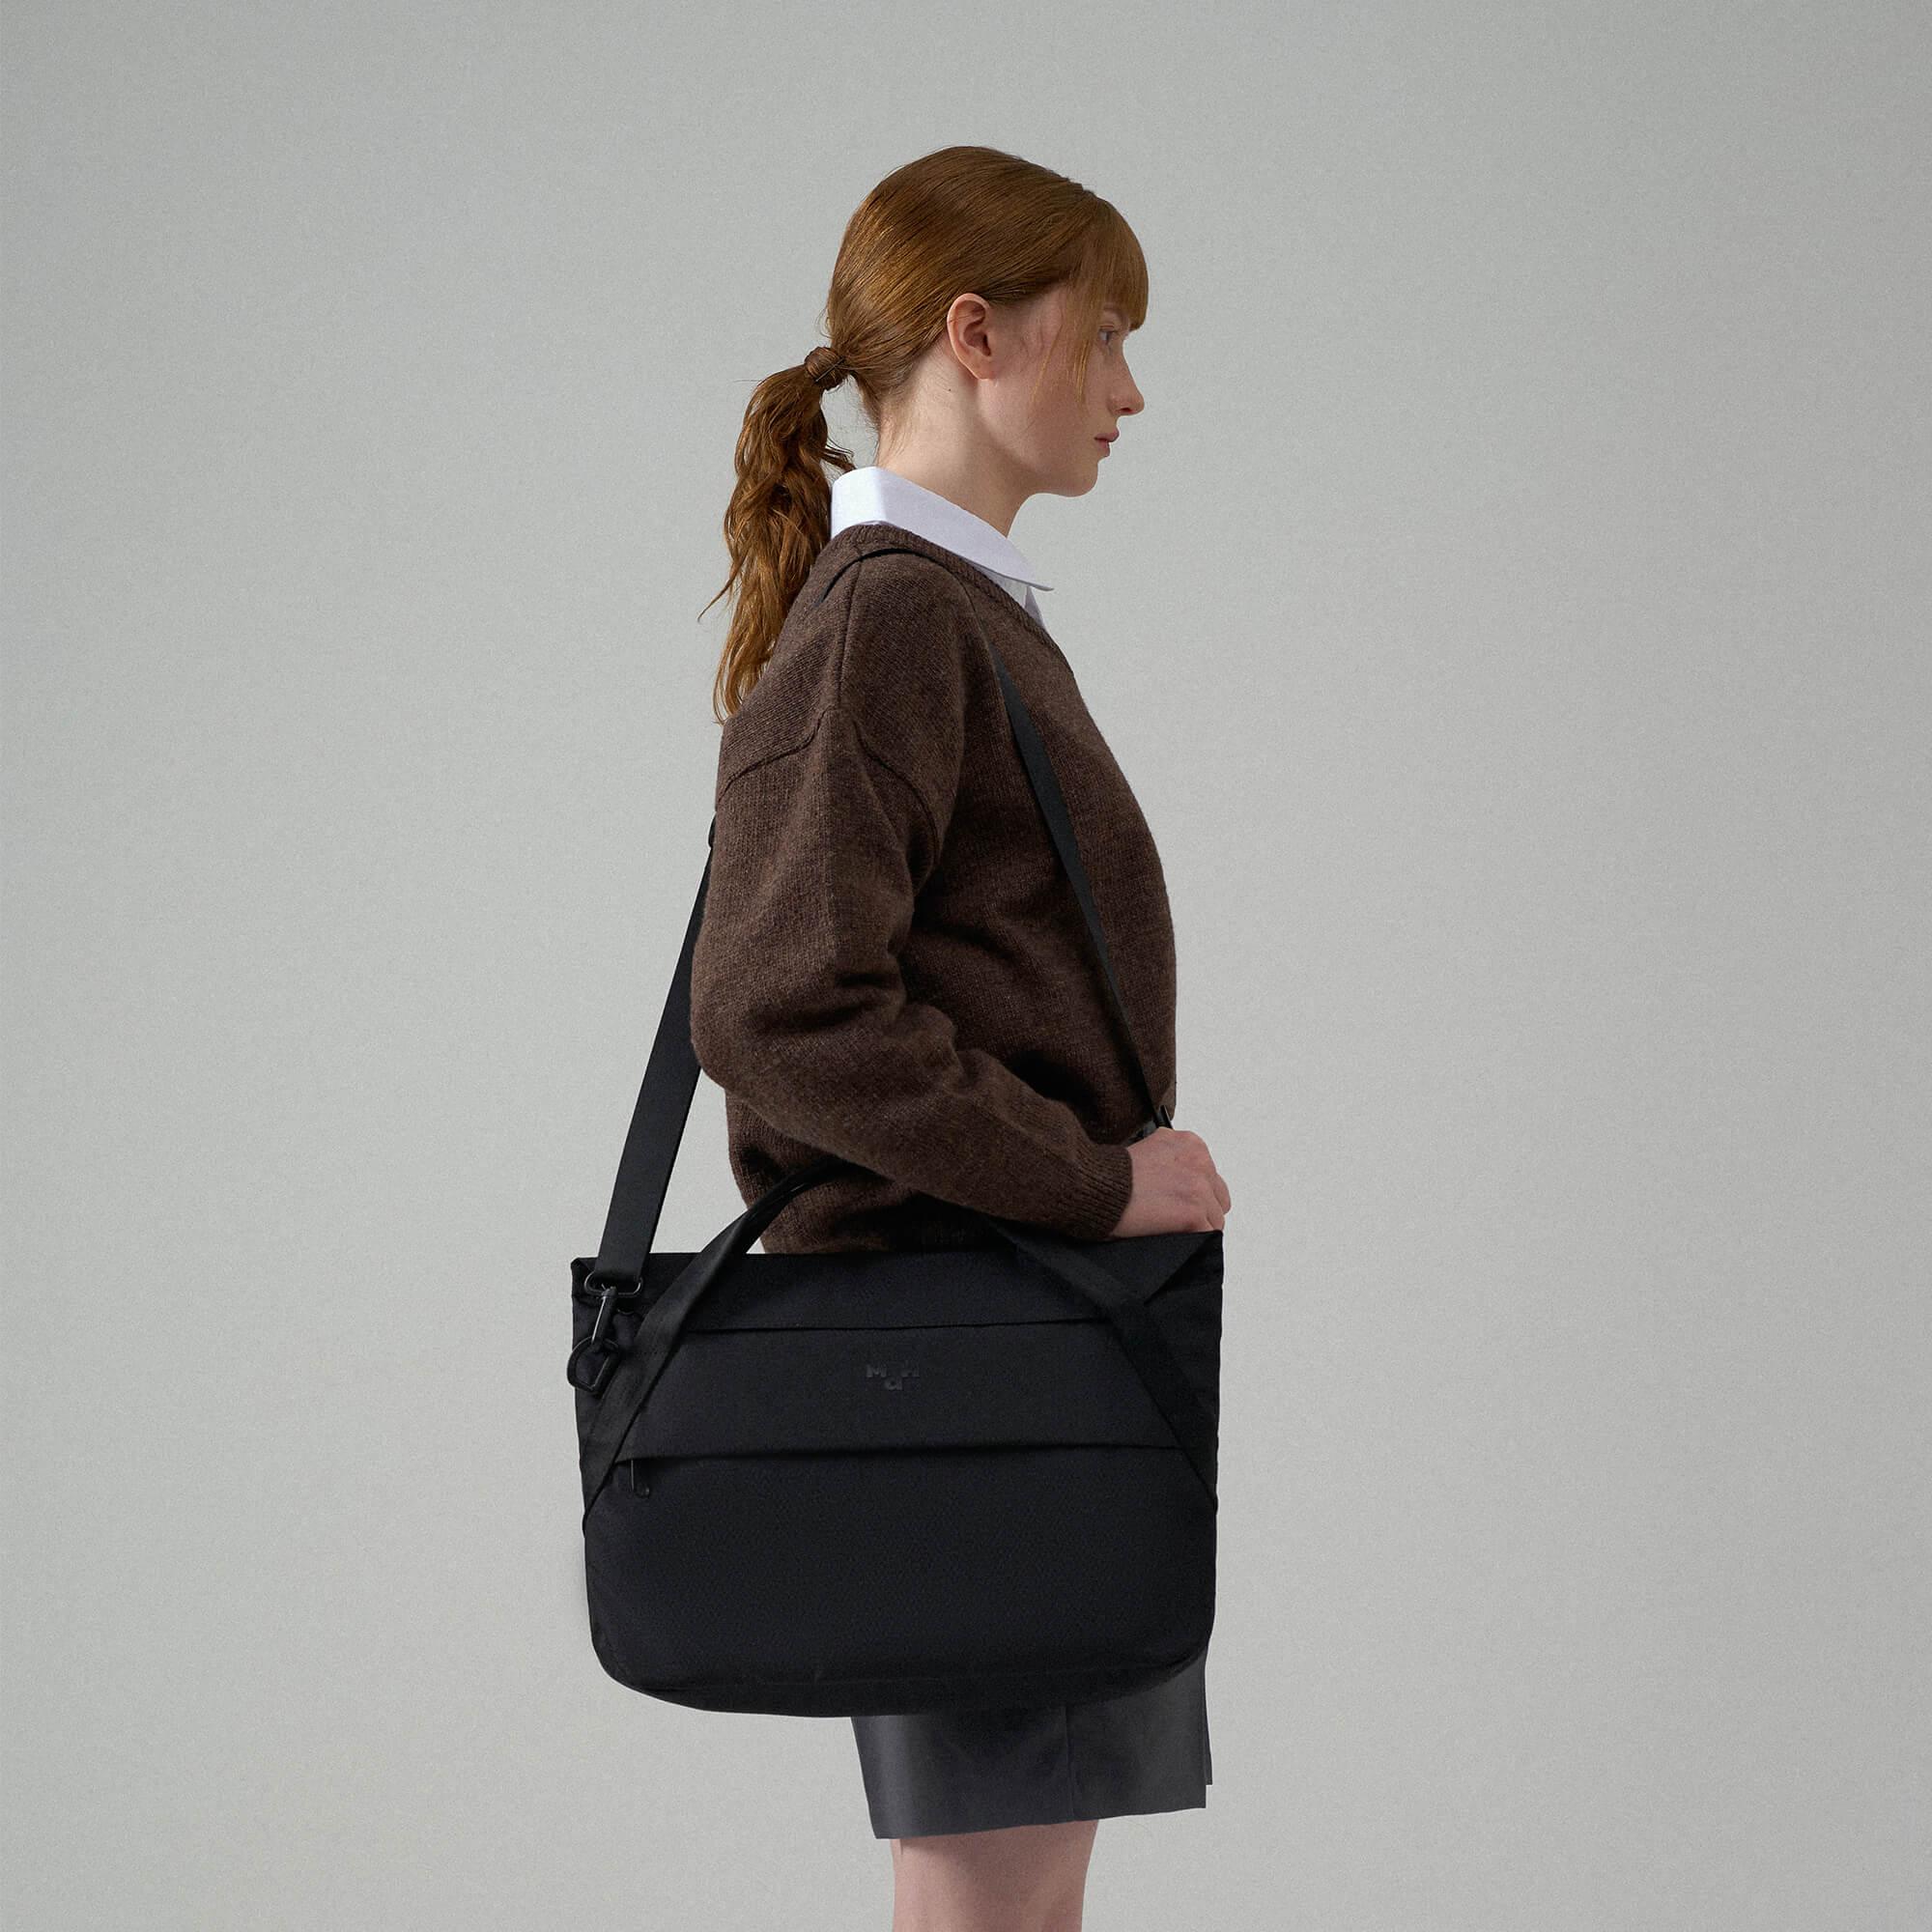 Crossbody Bag For Daily Use